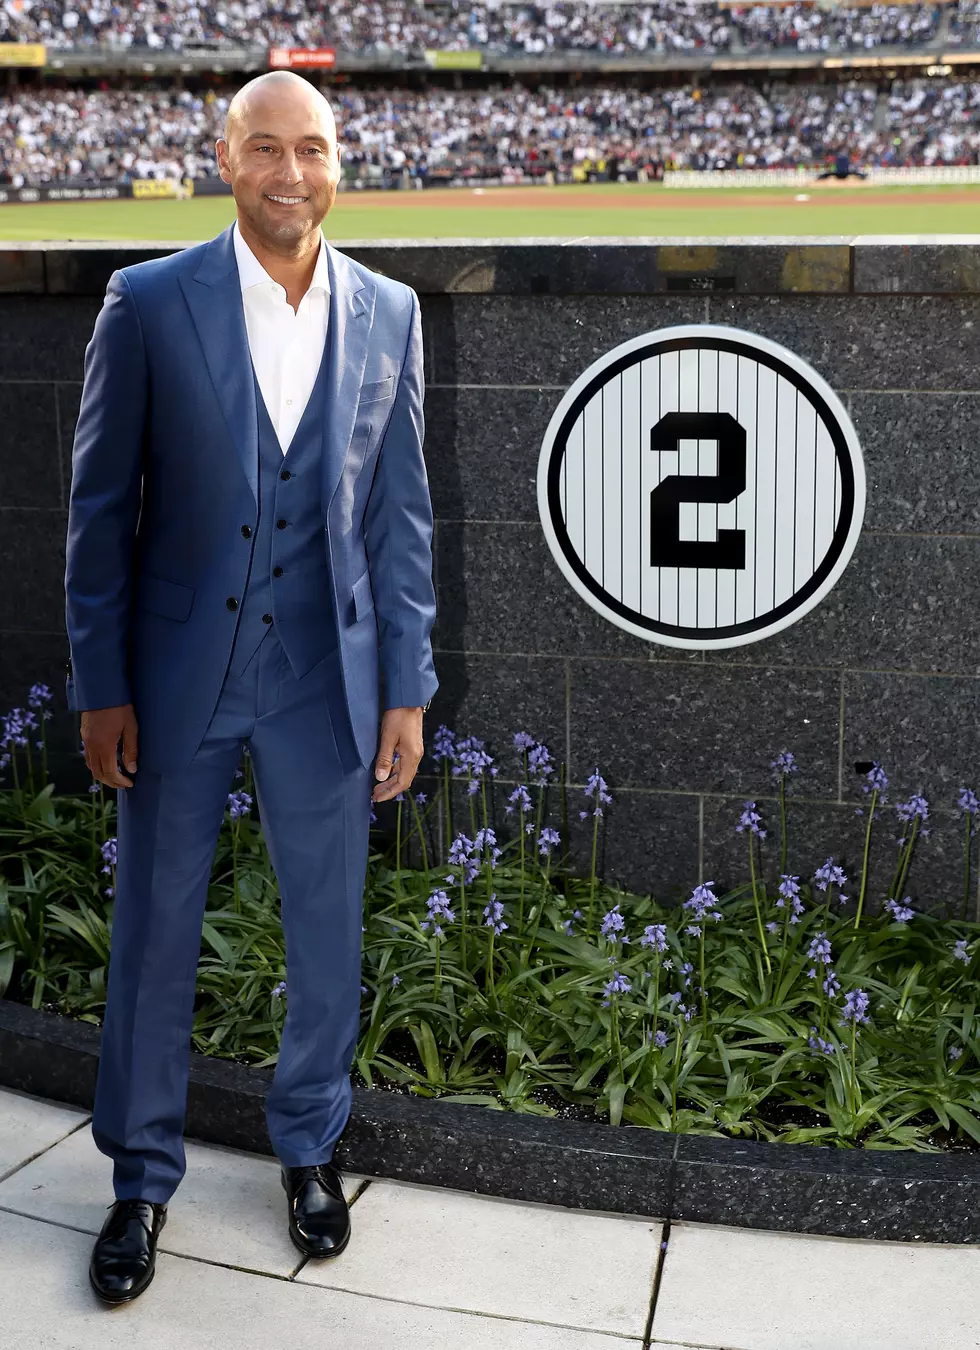 Jeter’s Hall Of Fame Ceremony Expected To Be Postponed